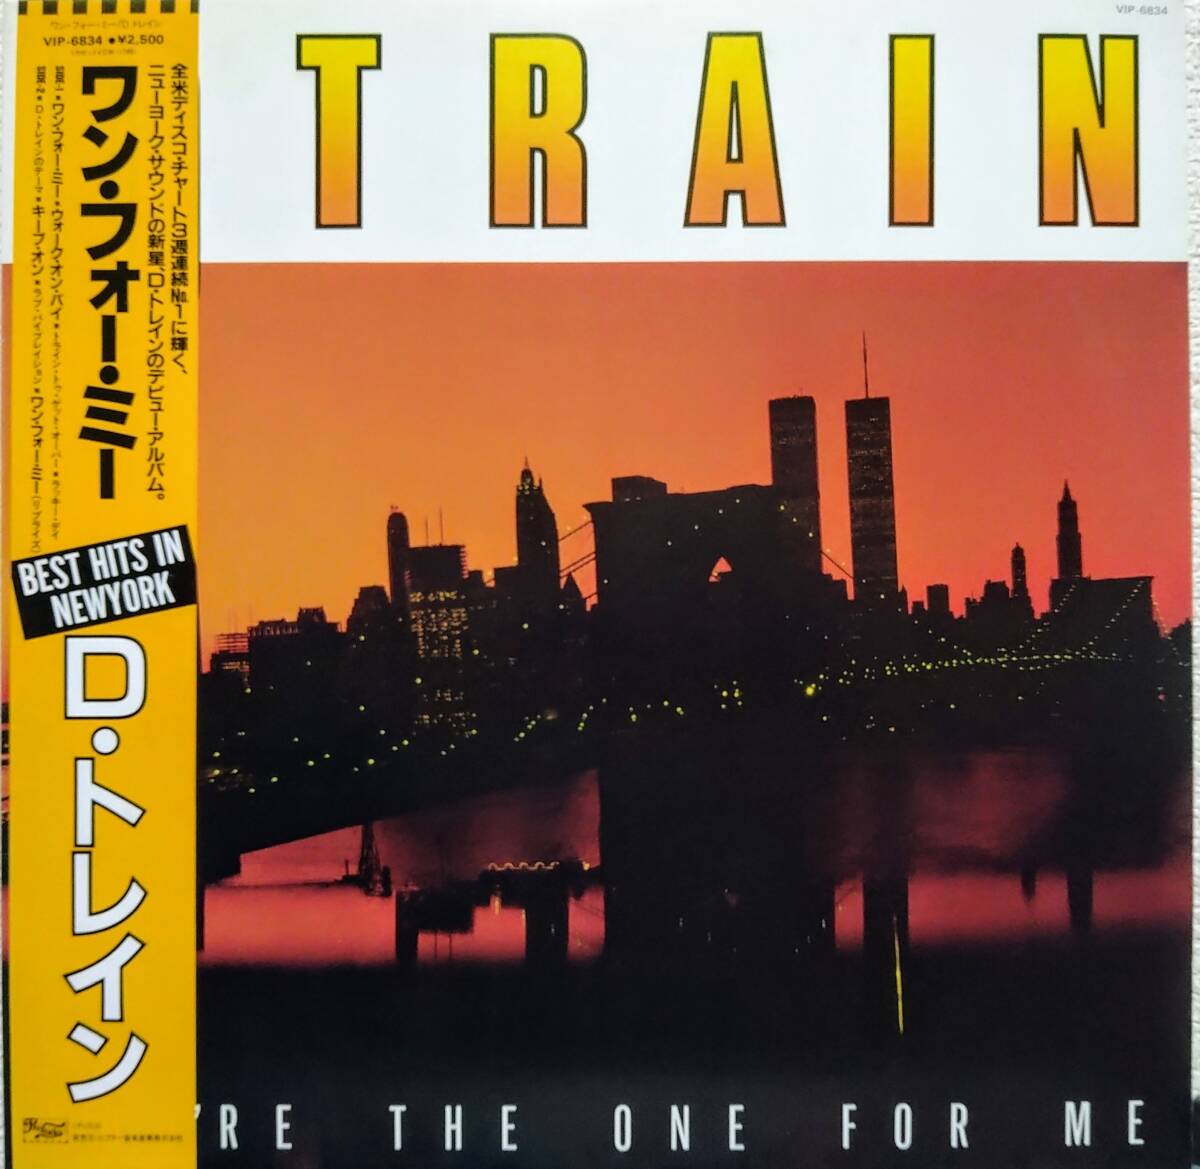 【LP Soul】D Train「You're The One For Me」JPN盤 Walk On By.Keep On 他 収録！_ジャケット